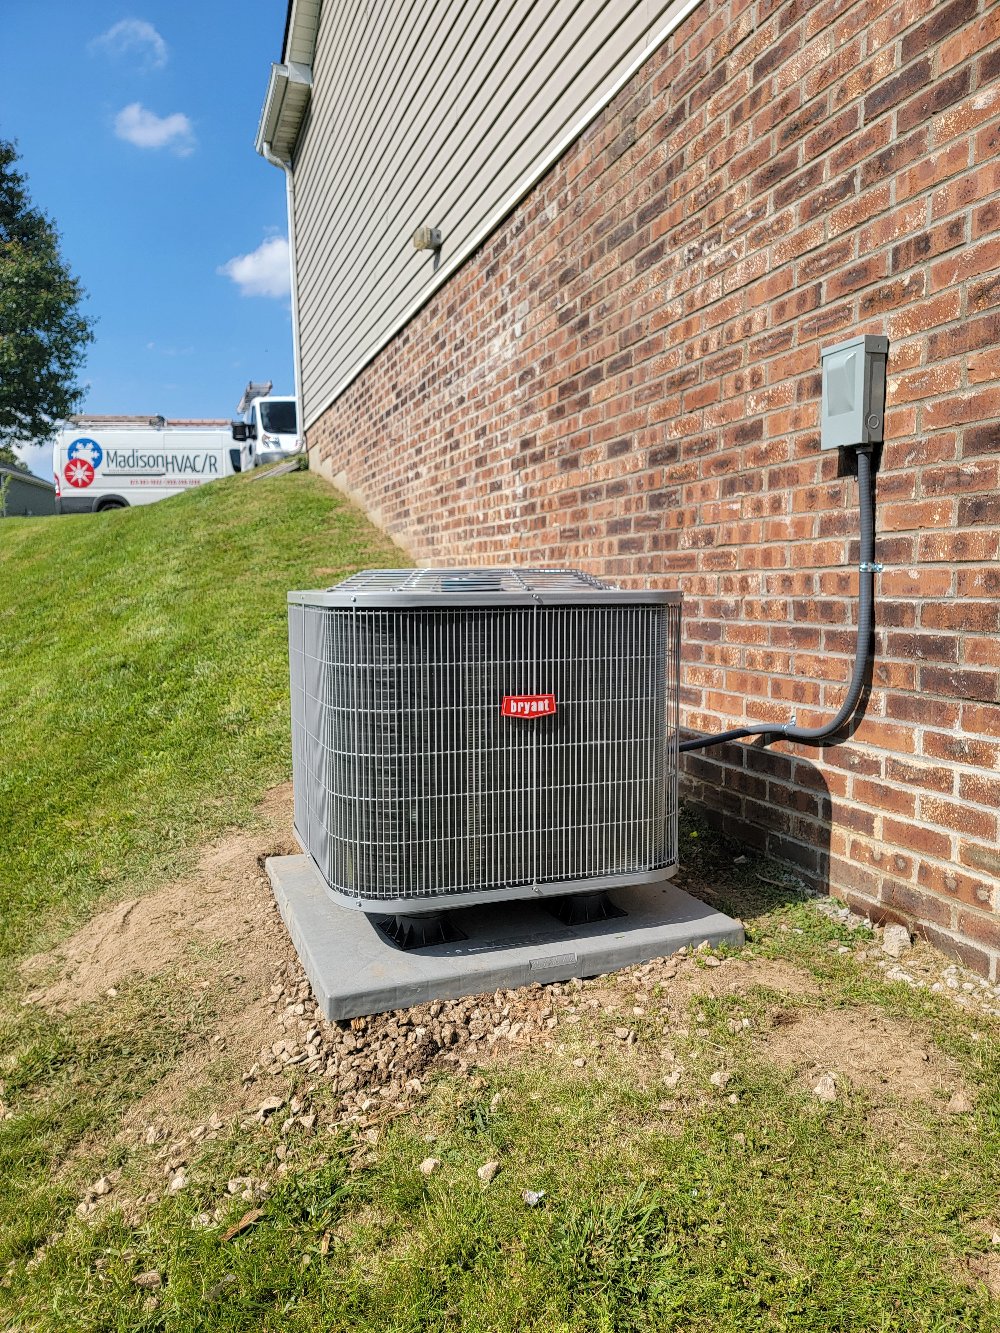 New Customer and New HVAC System in Richmond, KY